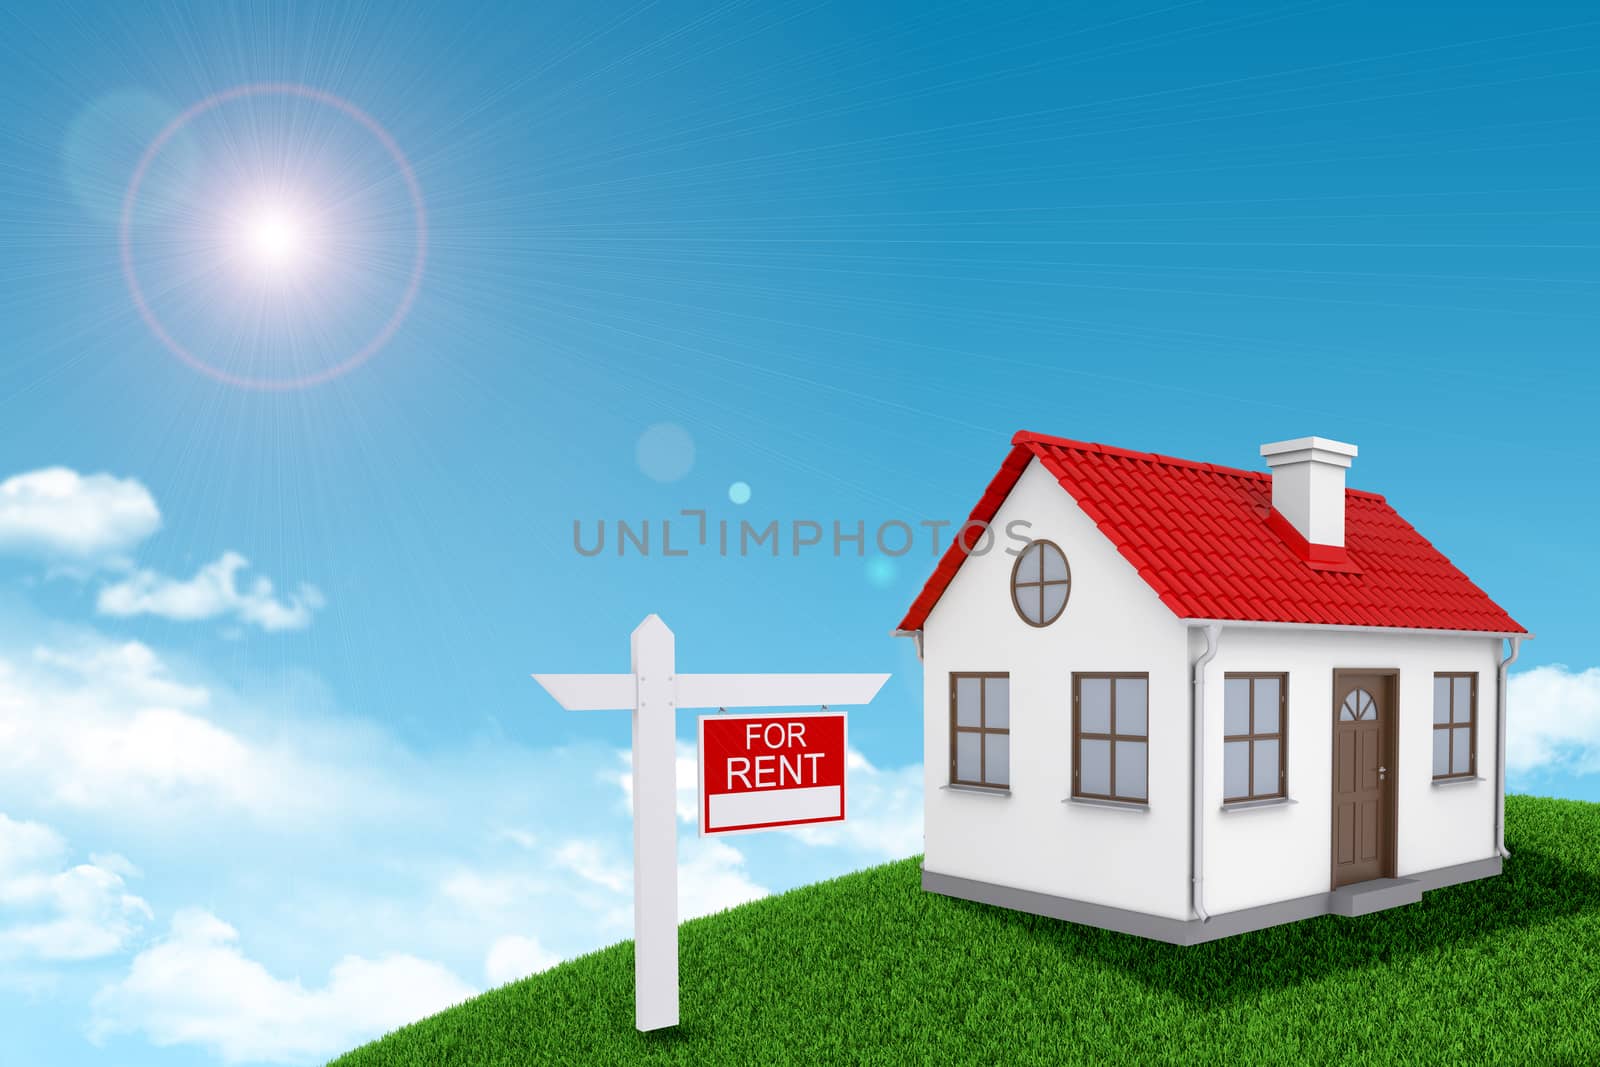 White house for rent with red roof, brown door and chimney on green grassy hill. Background sun shines brightly on large clouds